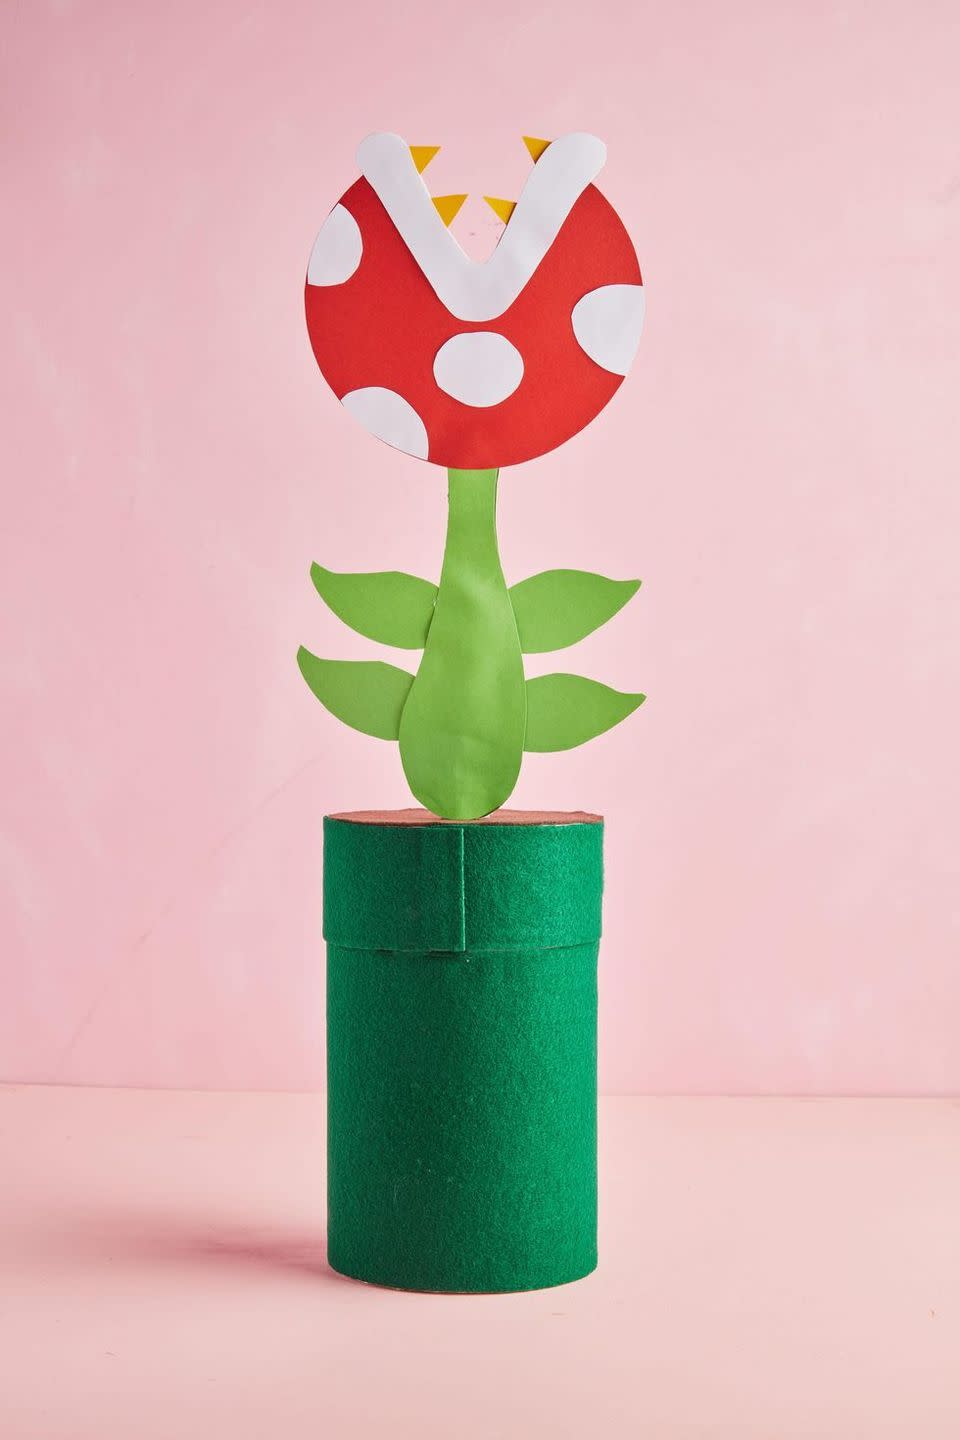 <p>Your kids will love dropping their Valentines into the mouth of this "carnivorous plant." It all starts with a paper tube!</p><p><strong>Get the tutorial at <a href="https://www.goodhousekeeping.com/holidays/valentines-day-ideas/g26066165/diy-valentines-box-ideas/?slide=1" rel="nofollow noopener" target="_blank" data-ylk="slk:Good Housekeeping" class="link rapid-noclick-resp">Good Housekeeping</a>.</strong></p><p><strong><a class="link rapid-noclick-resp" href="https://go.redirectingat.com?id=74968X1596630&url=https%3A%2F%2Fwww.walmart.com%2Fsearch%3Fq%3Dcard%2Bstock&sref=https%3A%2F%2Fwww.thepioneerwoman.com%2Fhome-lifestyle%2Fcrafts-diy%2Fg35119968%2Fvalentines-day-box-ideas%2F" rel="nofollow noopener" target="_blank" data-ylk="slk:SHOP CARD STOCK">SHOP CARD STOCK</a><br></strong></p>